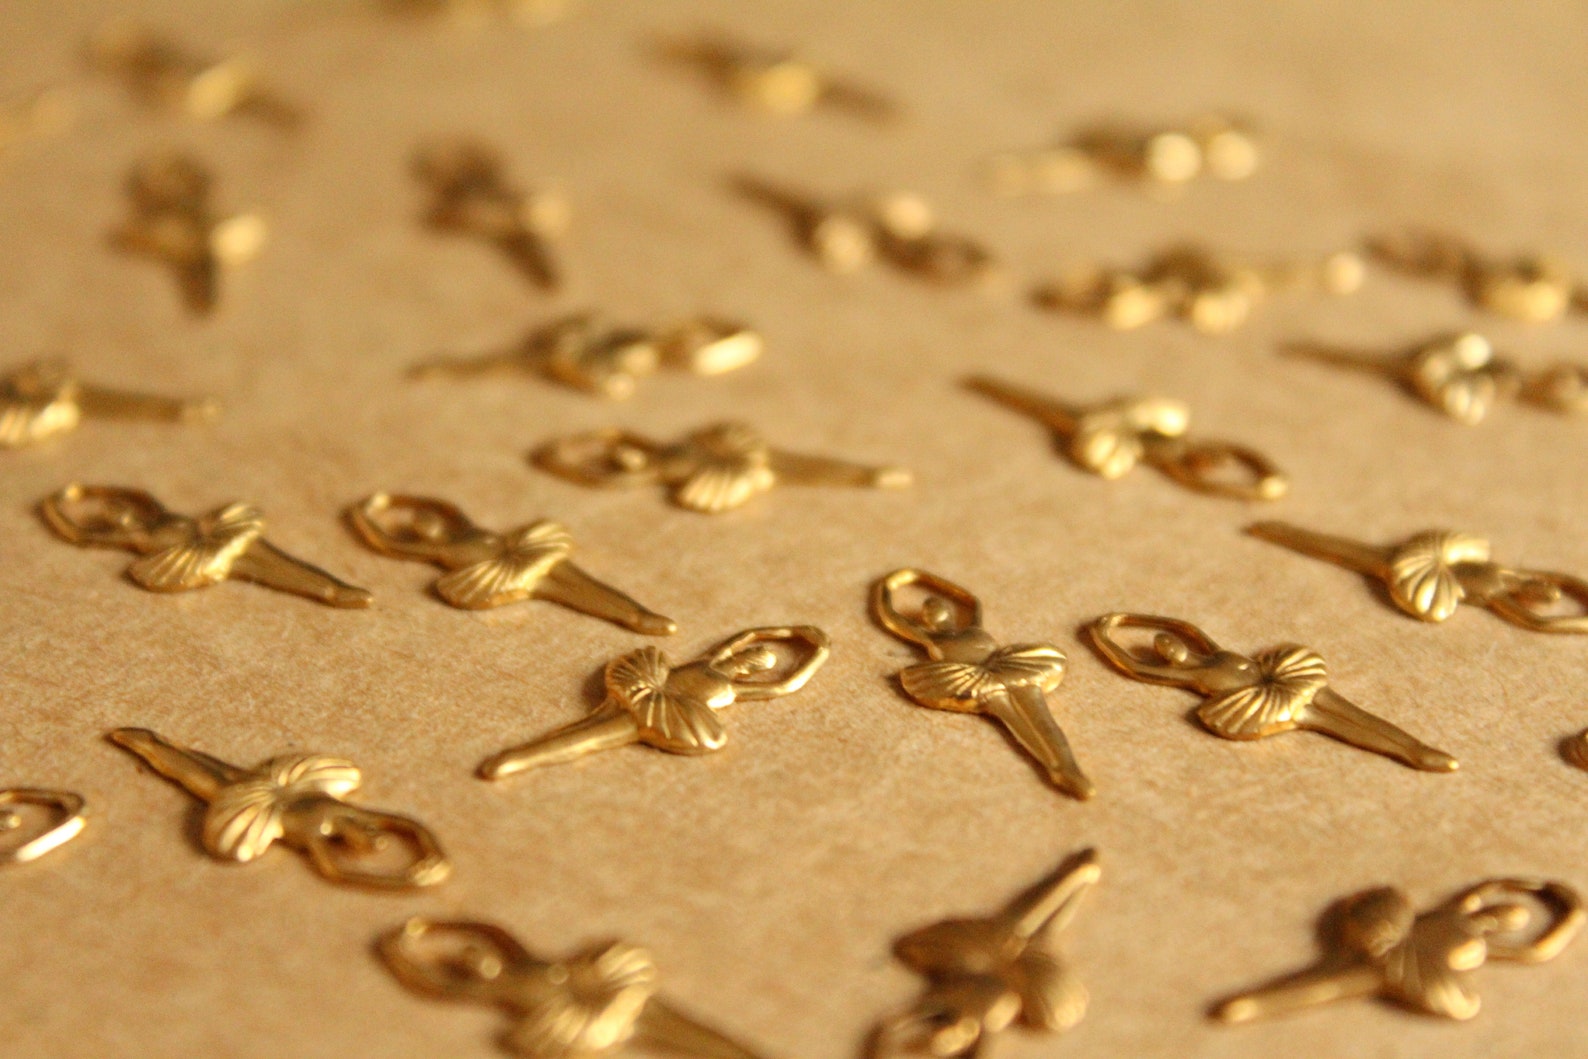 20 pc. raw brass ballet dancer / ballerina stampings : 16mm by 7mm - made in usa | rb-1097